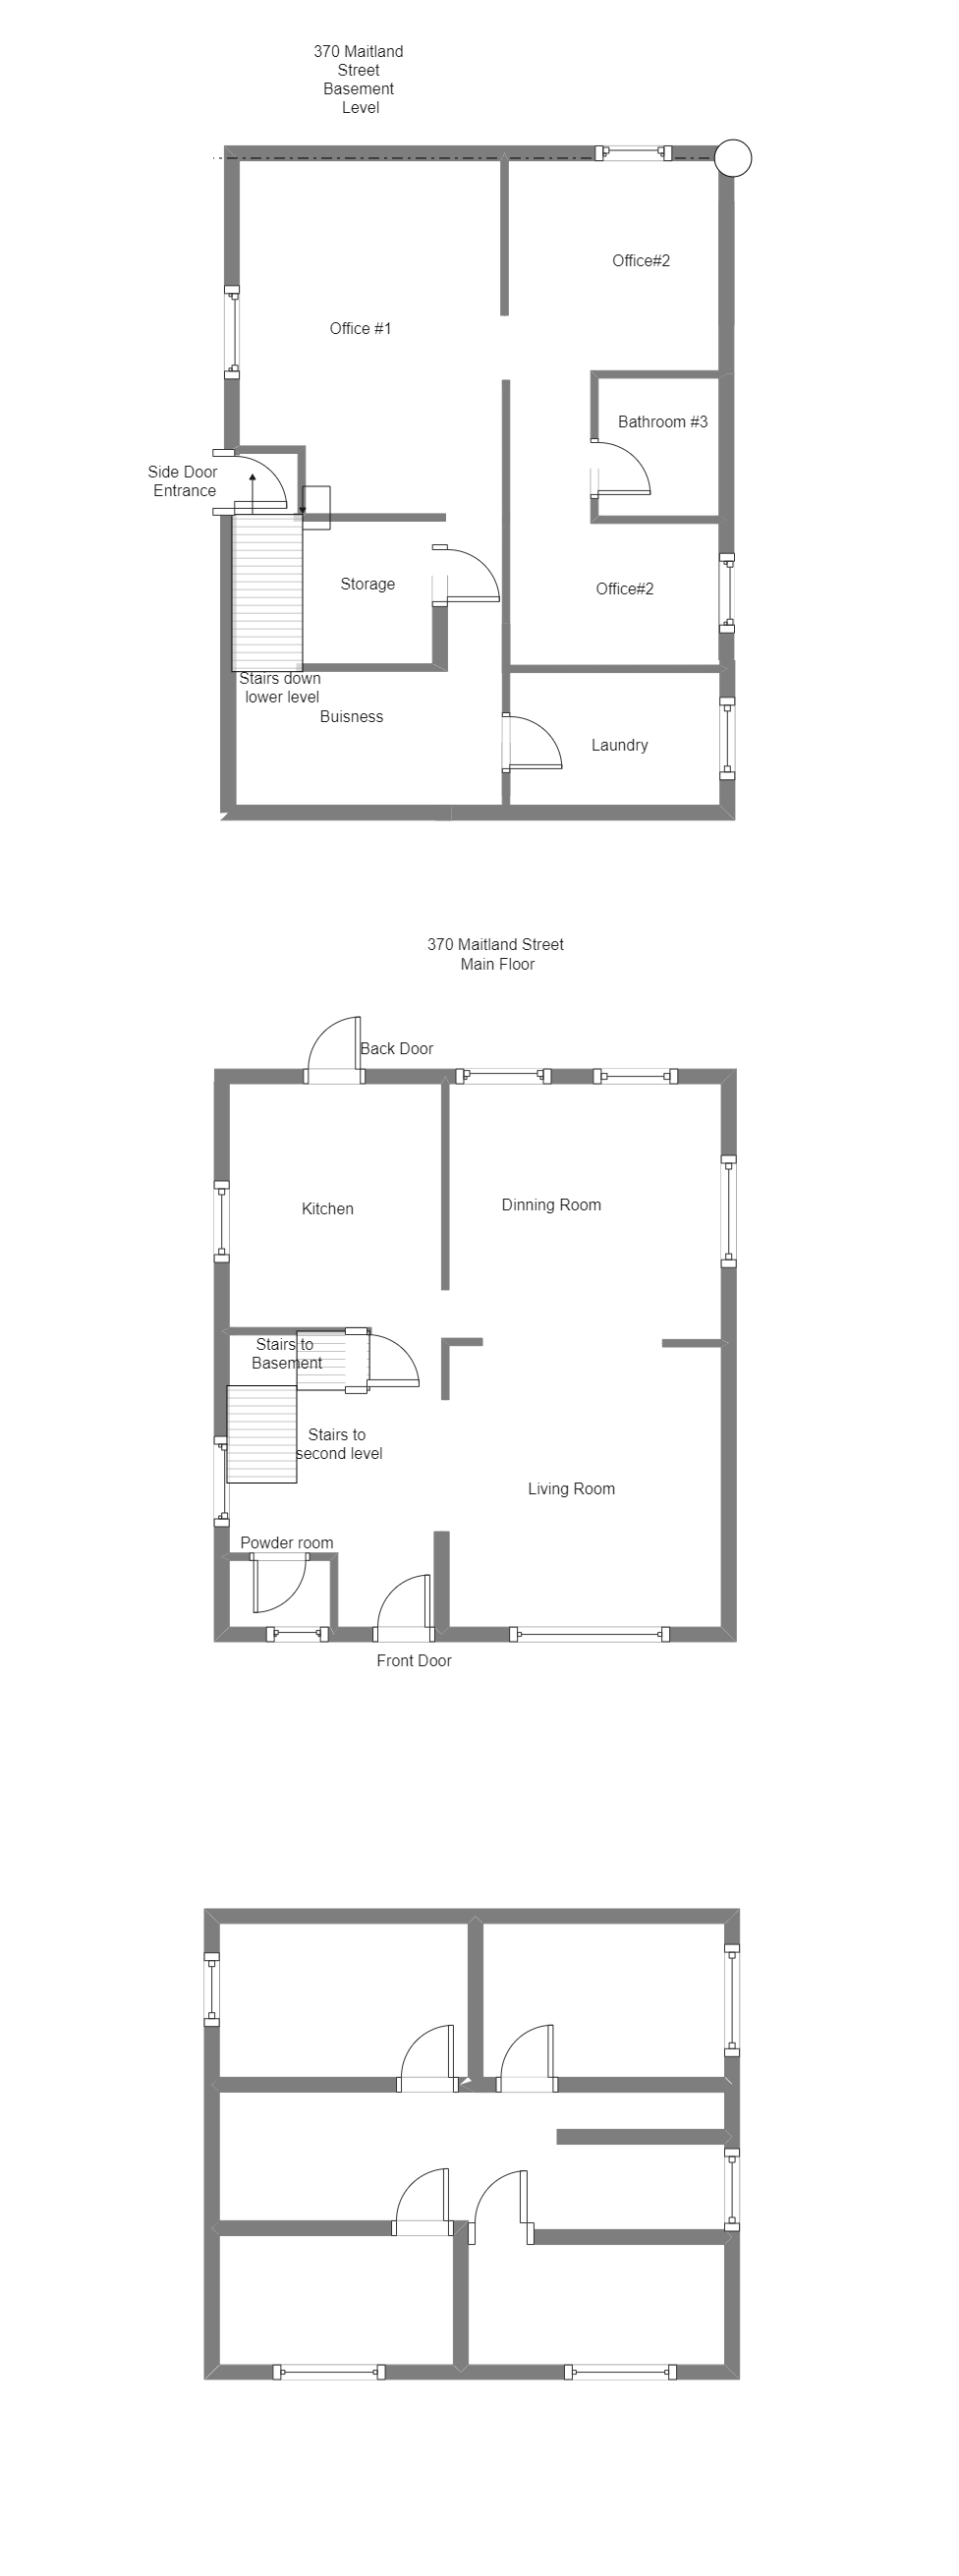 Simple floor plan may provide a nice, welcoming environment while reducing monthly mortgage payments to a minimal. What constitutes a "simple" floor plan? A single low-pitch roof, a regular form with few gables or bays, and little detailing that does not 